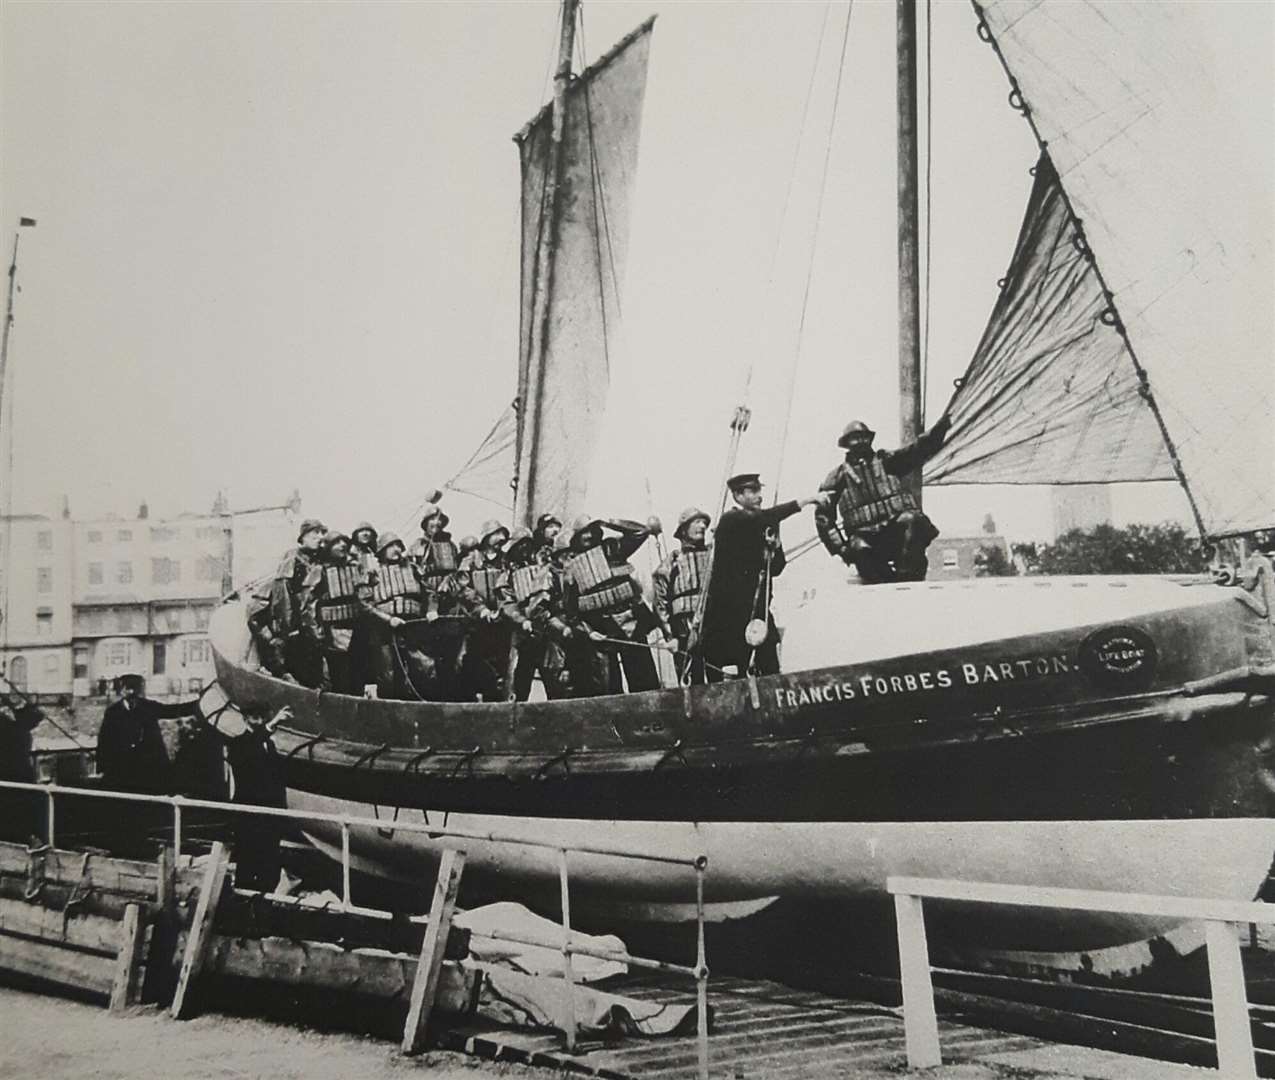 The Francis Forbes Barton on Broadstairs Pier in 1910